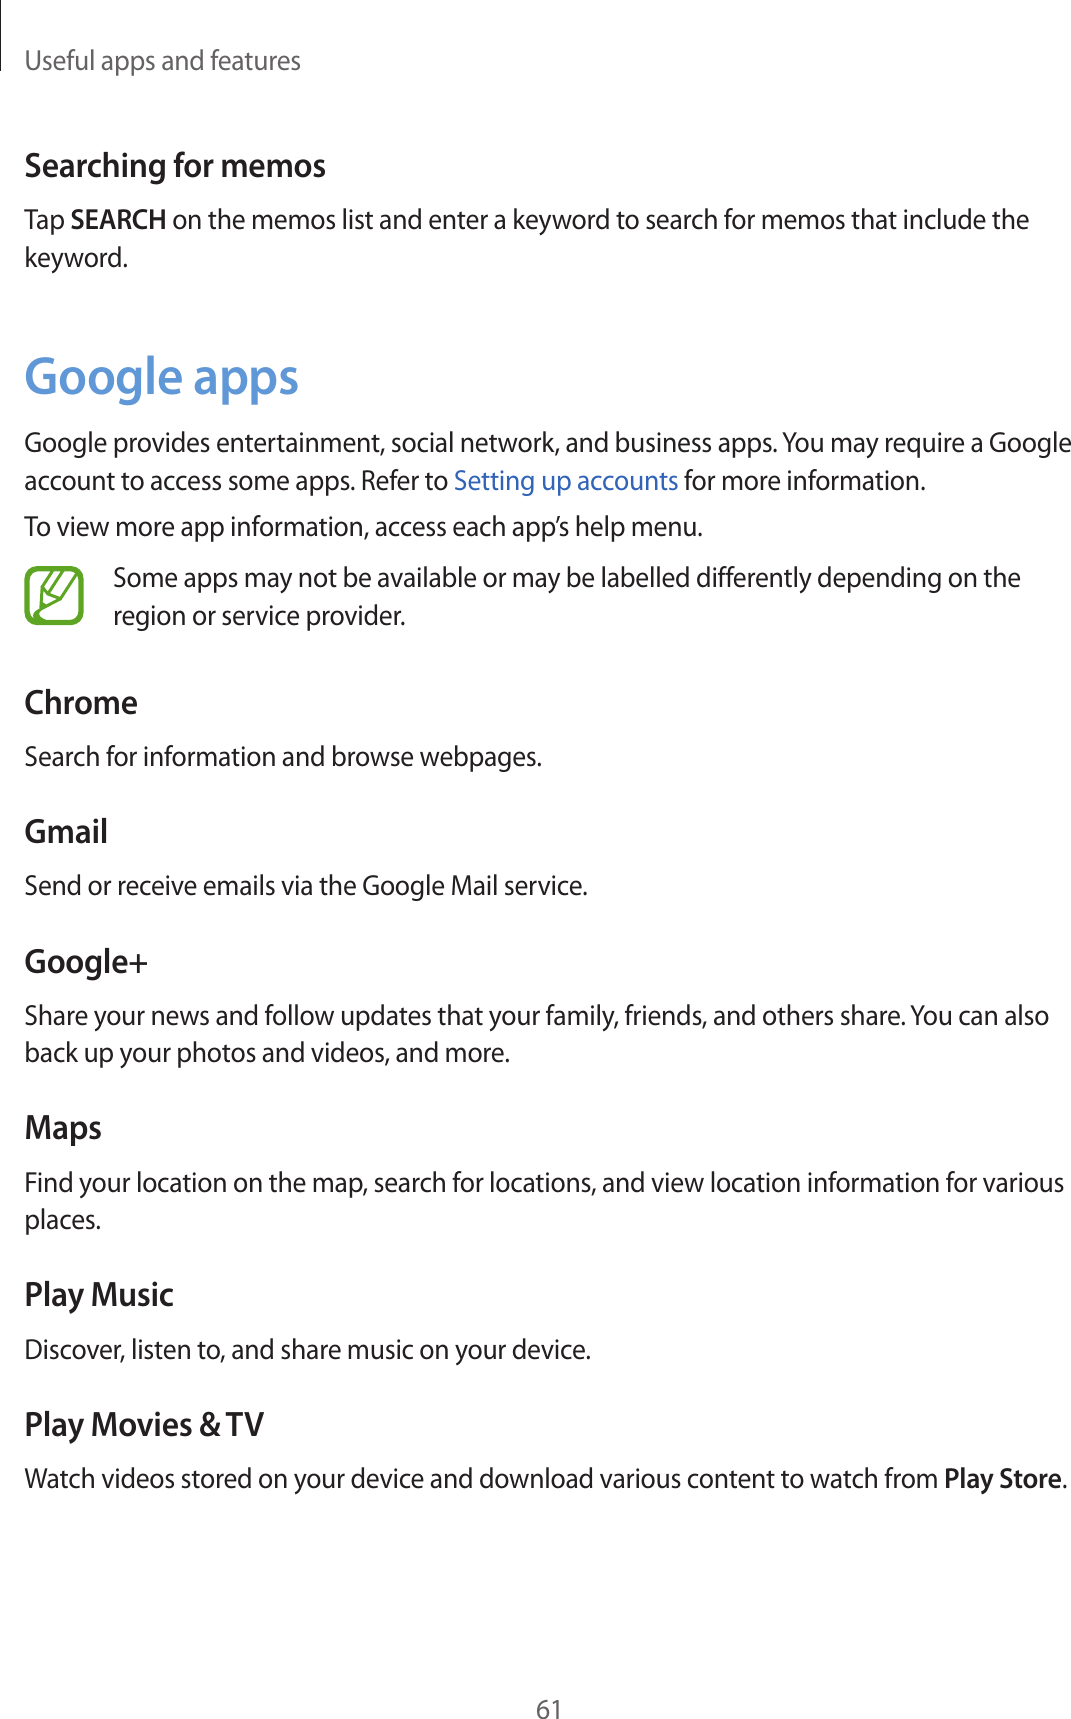 Useful apps and features61Searching for memosTap SEARCH on the memos list and enter a keyword to search for memos that include the keyword.Google appsGoogle provides entertainment, social network, and business apps. You may require a Google account to access some apps. Refer to Setting up accounts for more information.To view more app information, access each app’s help menu.Some apps may not be available or may be labelled differently depending on the region or service provider.ChromeSearch for information and browse webpages.GmailSend or receive emails via the Google Mail service.Google+Share your news and follow updates that your family, friends, and others share. You can also back up your photos and videos, and more.MapsFind your location on the map, search for locations, and view location information for various places.Play MusicDiscover, listen to, and share music on your device.Play Movies &amp; TVWatch videos stored on your device and download various content to watch from Play Store.